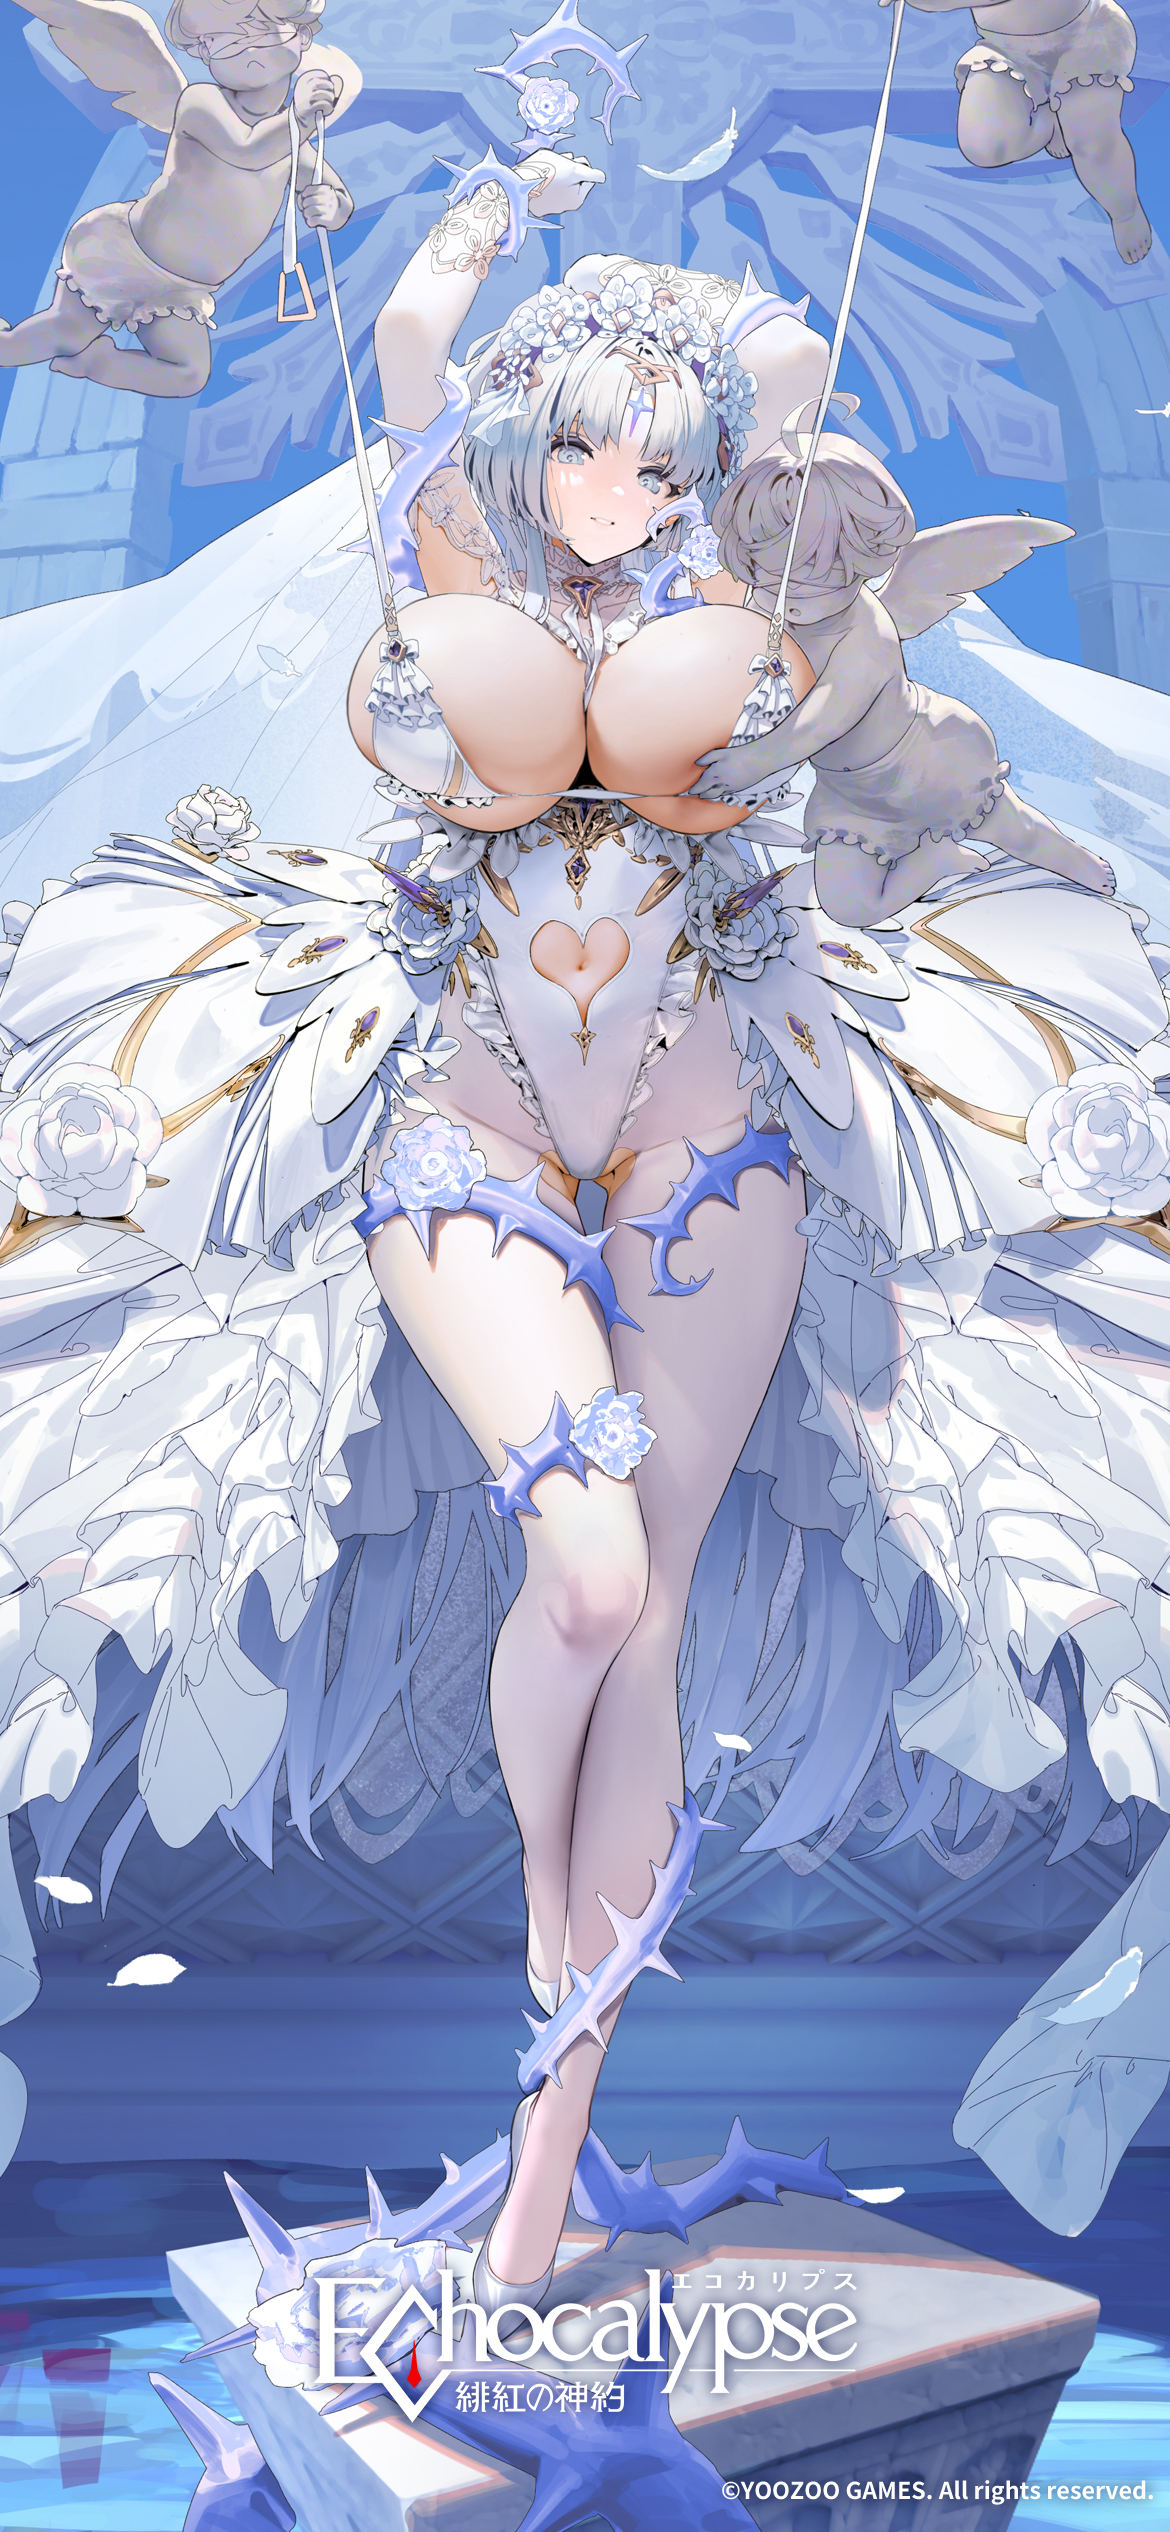 Anime 1170x2532 Echocalypse huge breasts portrait display anime girls Levia (Echocalypse) petals flowers looking at viewer white flowers belly button angel light blue eyes flower crown pantyhose white pantyhose leotard white leotard white bra white gloves lingerie white lingerie feathers flower in hair bridal veil white dress white heels watermarked elbow gloves gloves strategic covering arms up wedding dress thorns pulling clothing